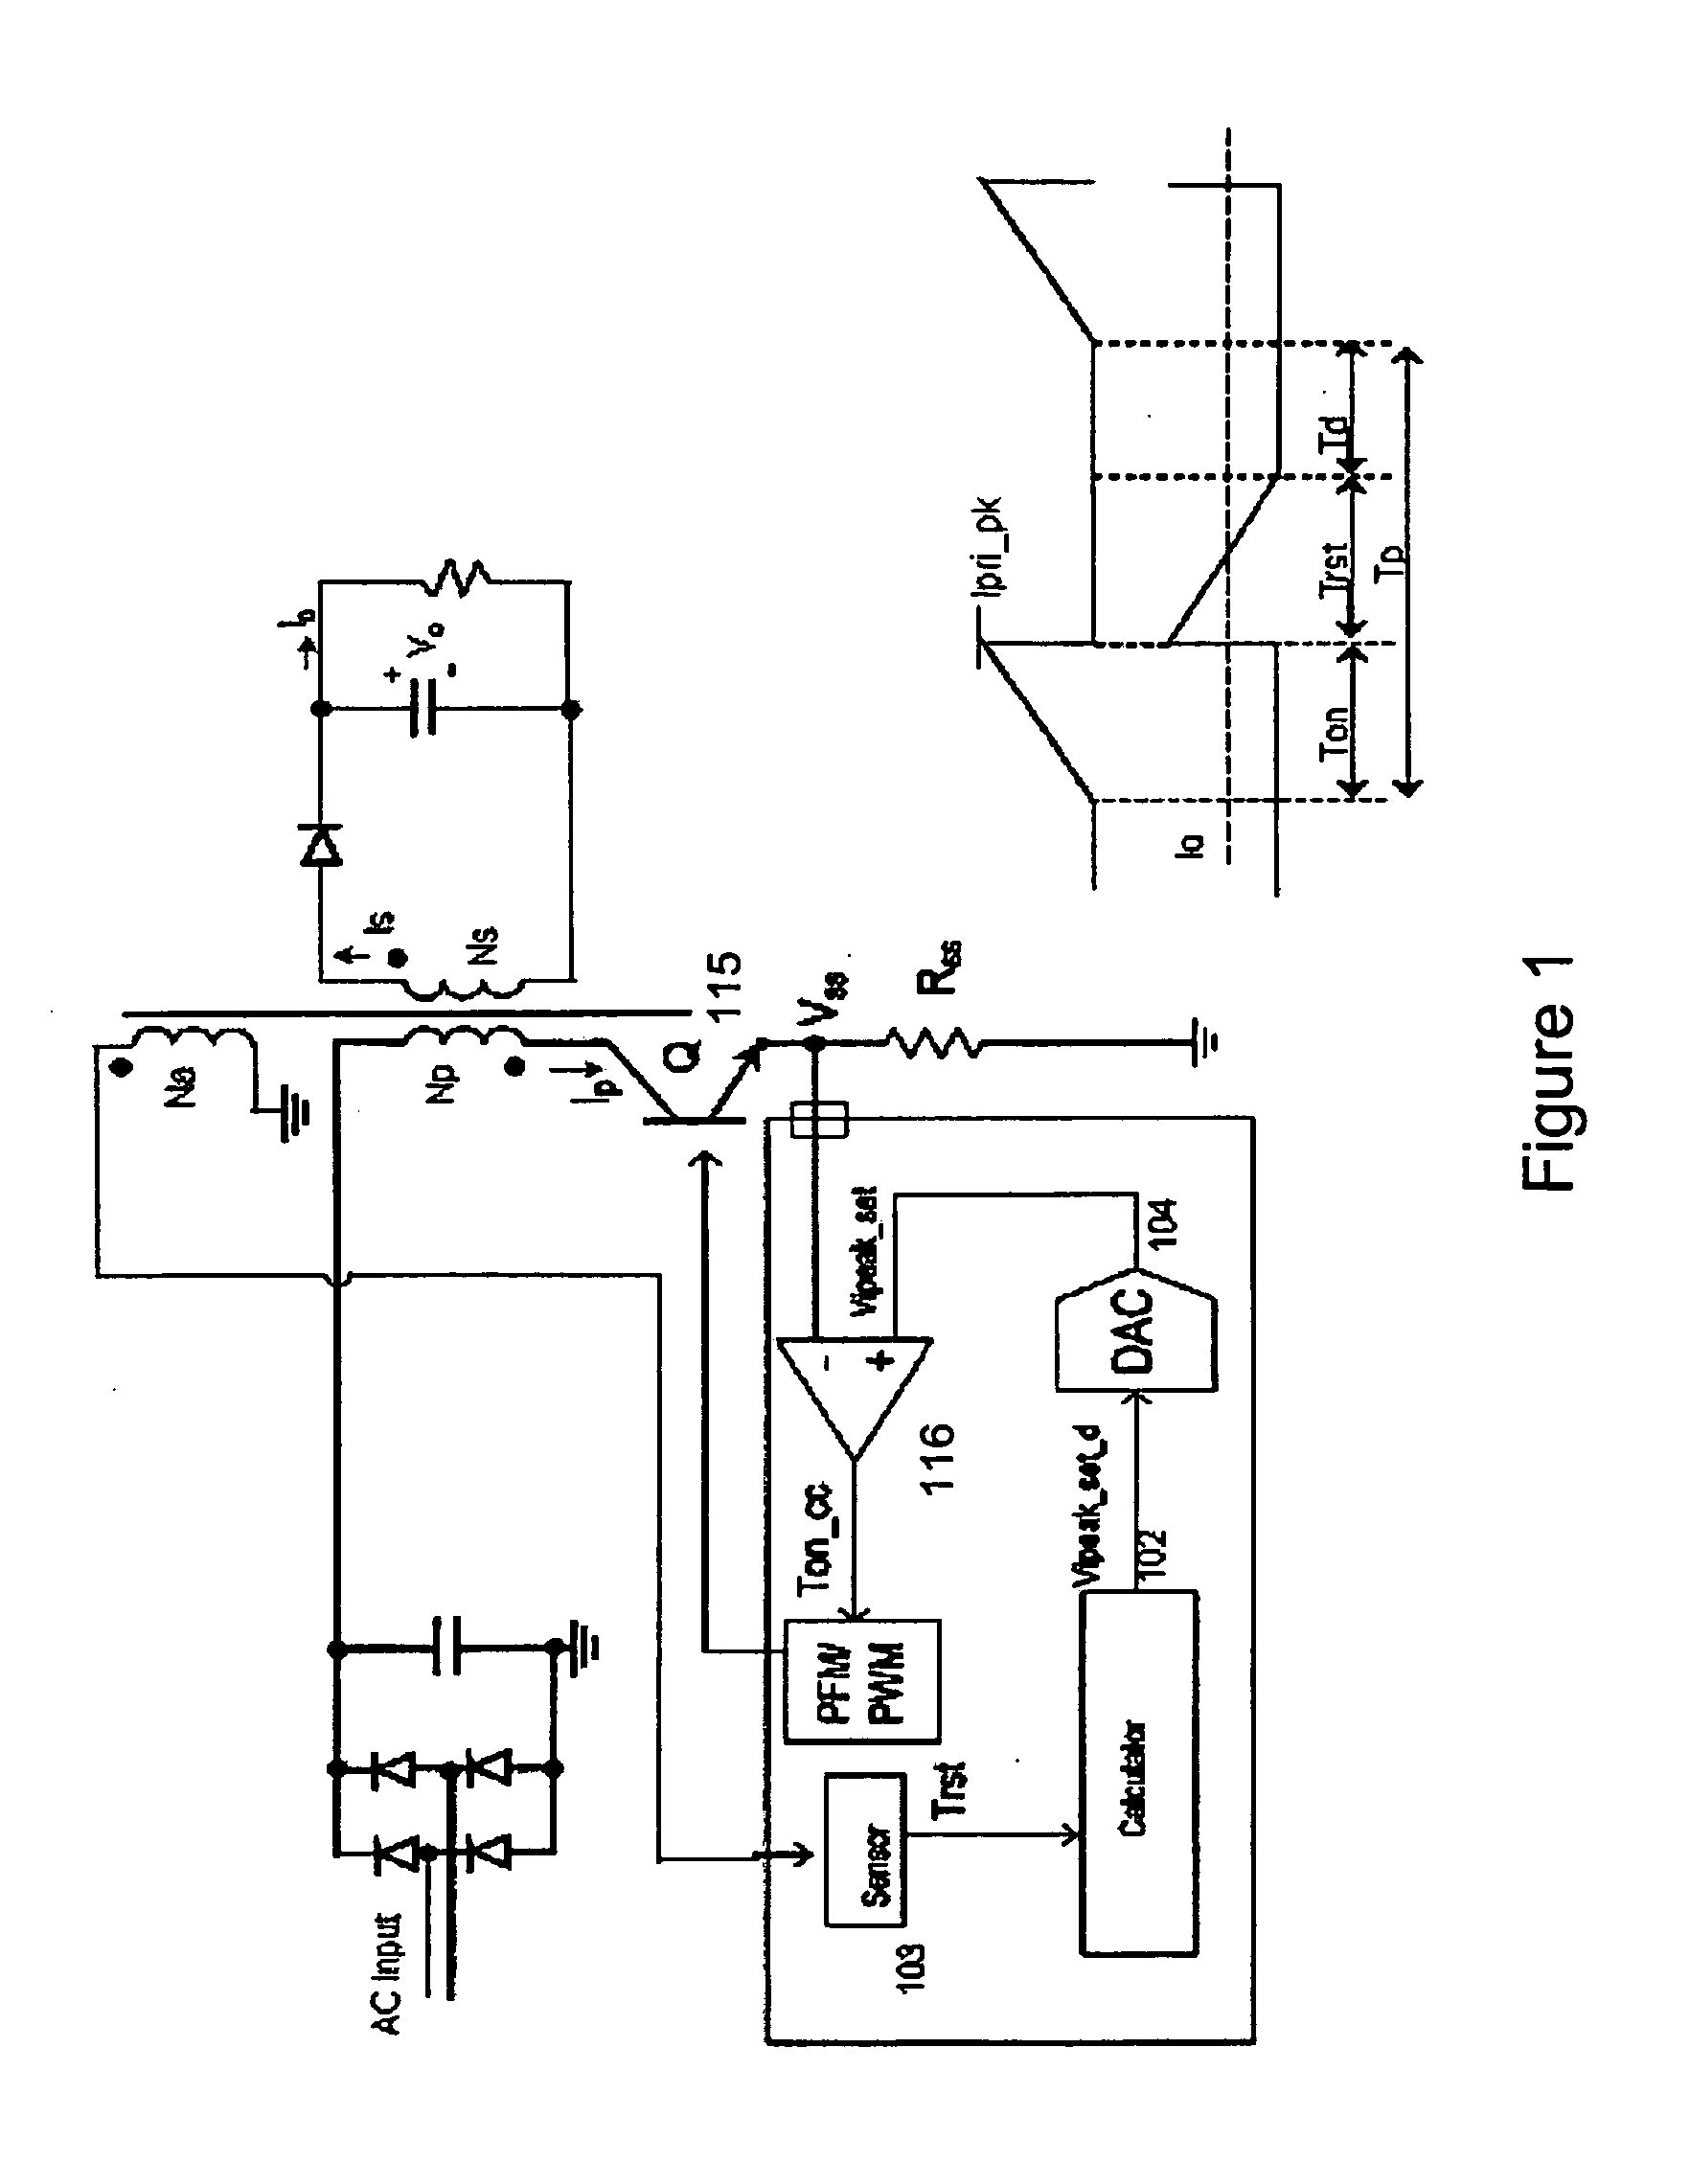 System And Method For Controlling A Current Limit With Primary Side Sensing Using A Hybrid PWM and PFM Control